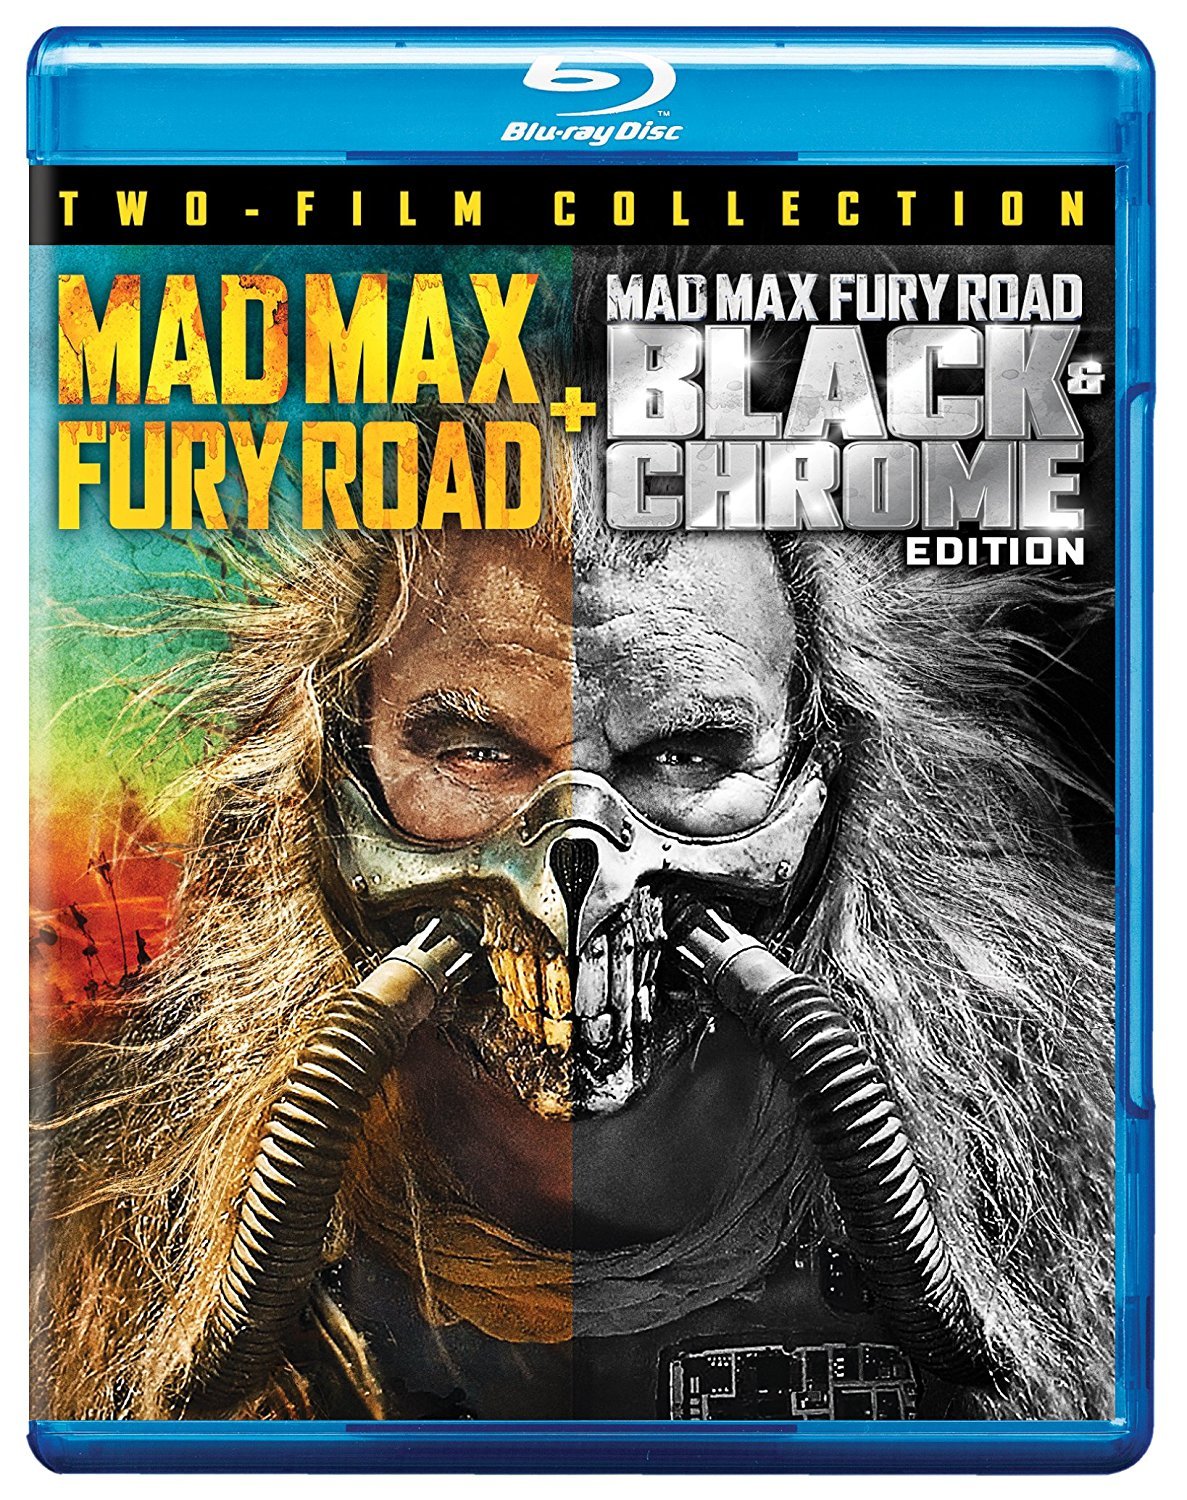 mad-max-fury-road-black-chrome-edition-2-disc-movie-purchase-or